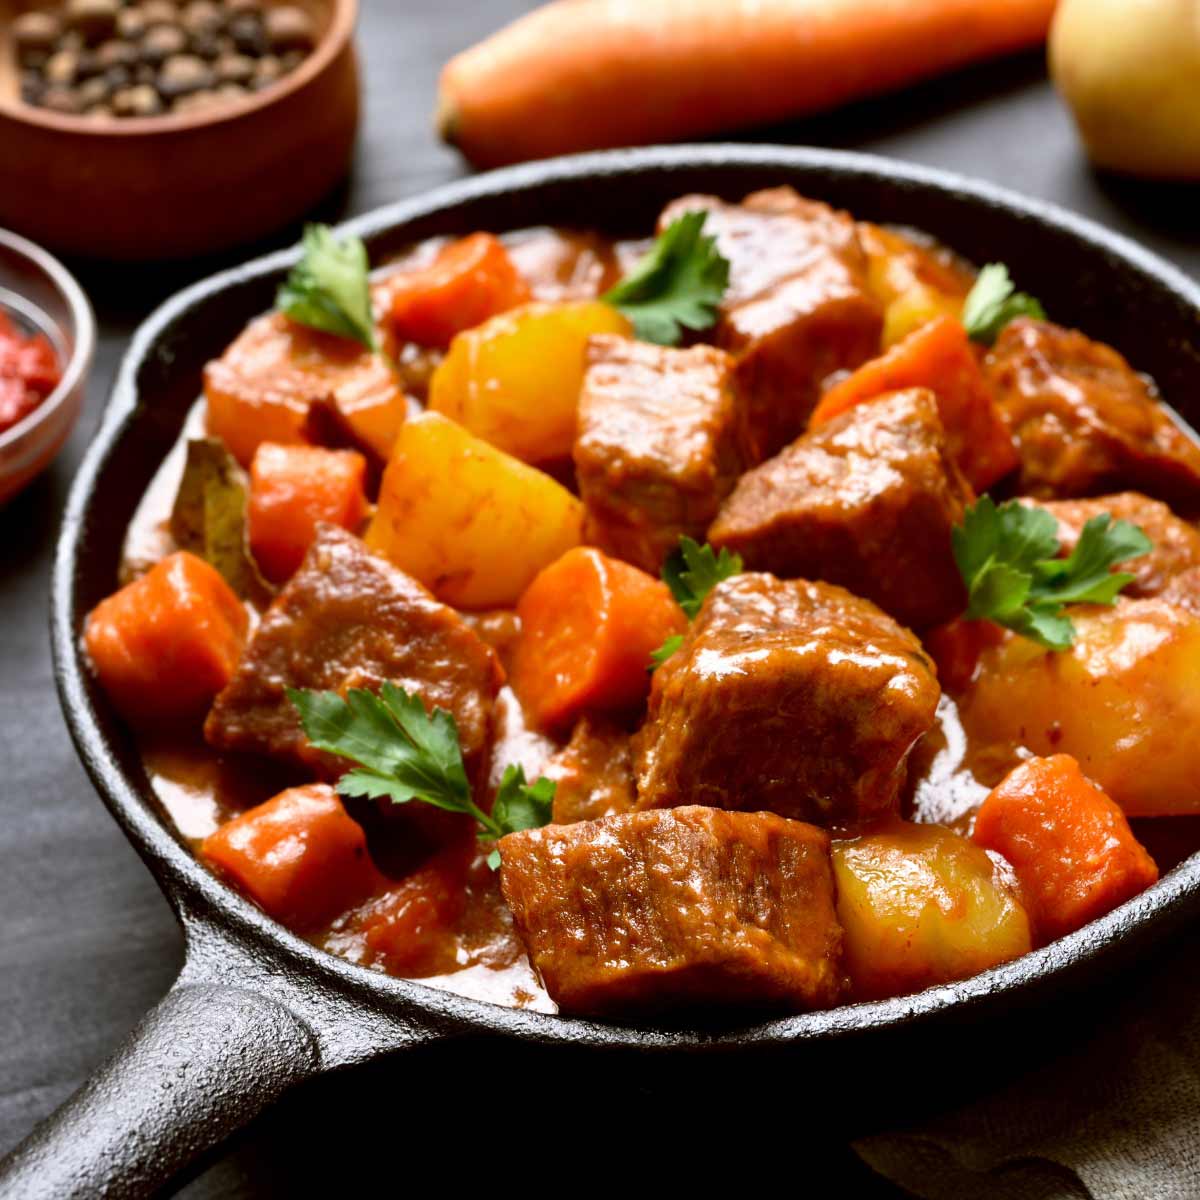 Beef mechado with potatoes and carrots in a black skillet.